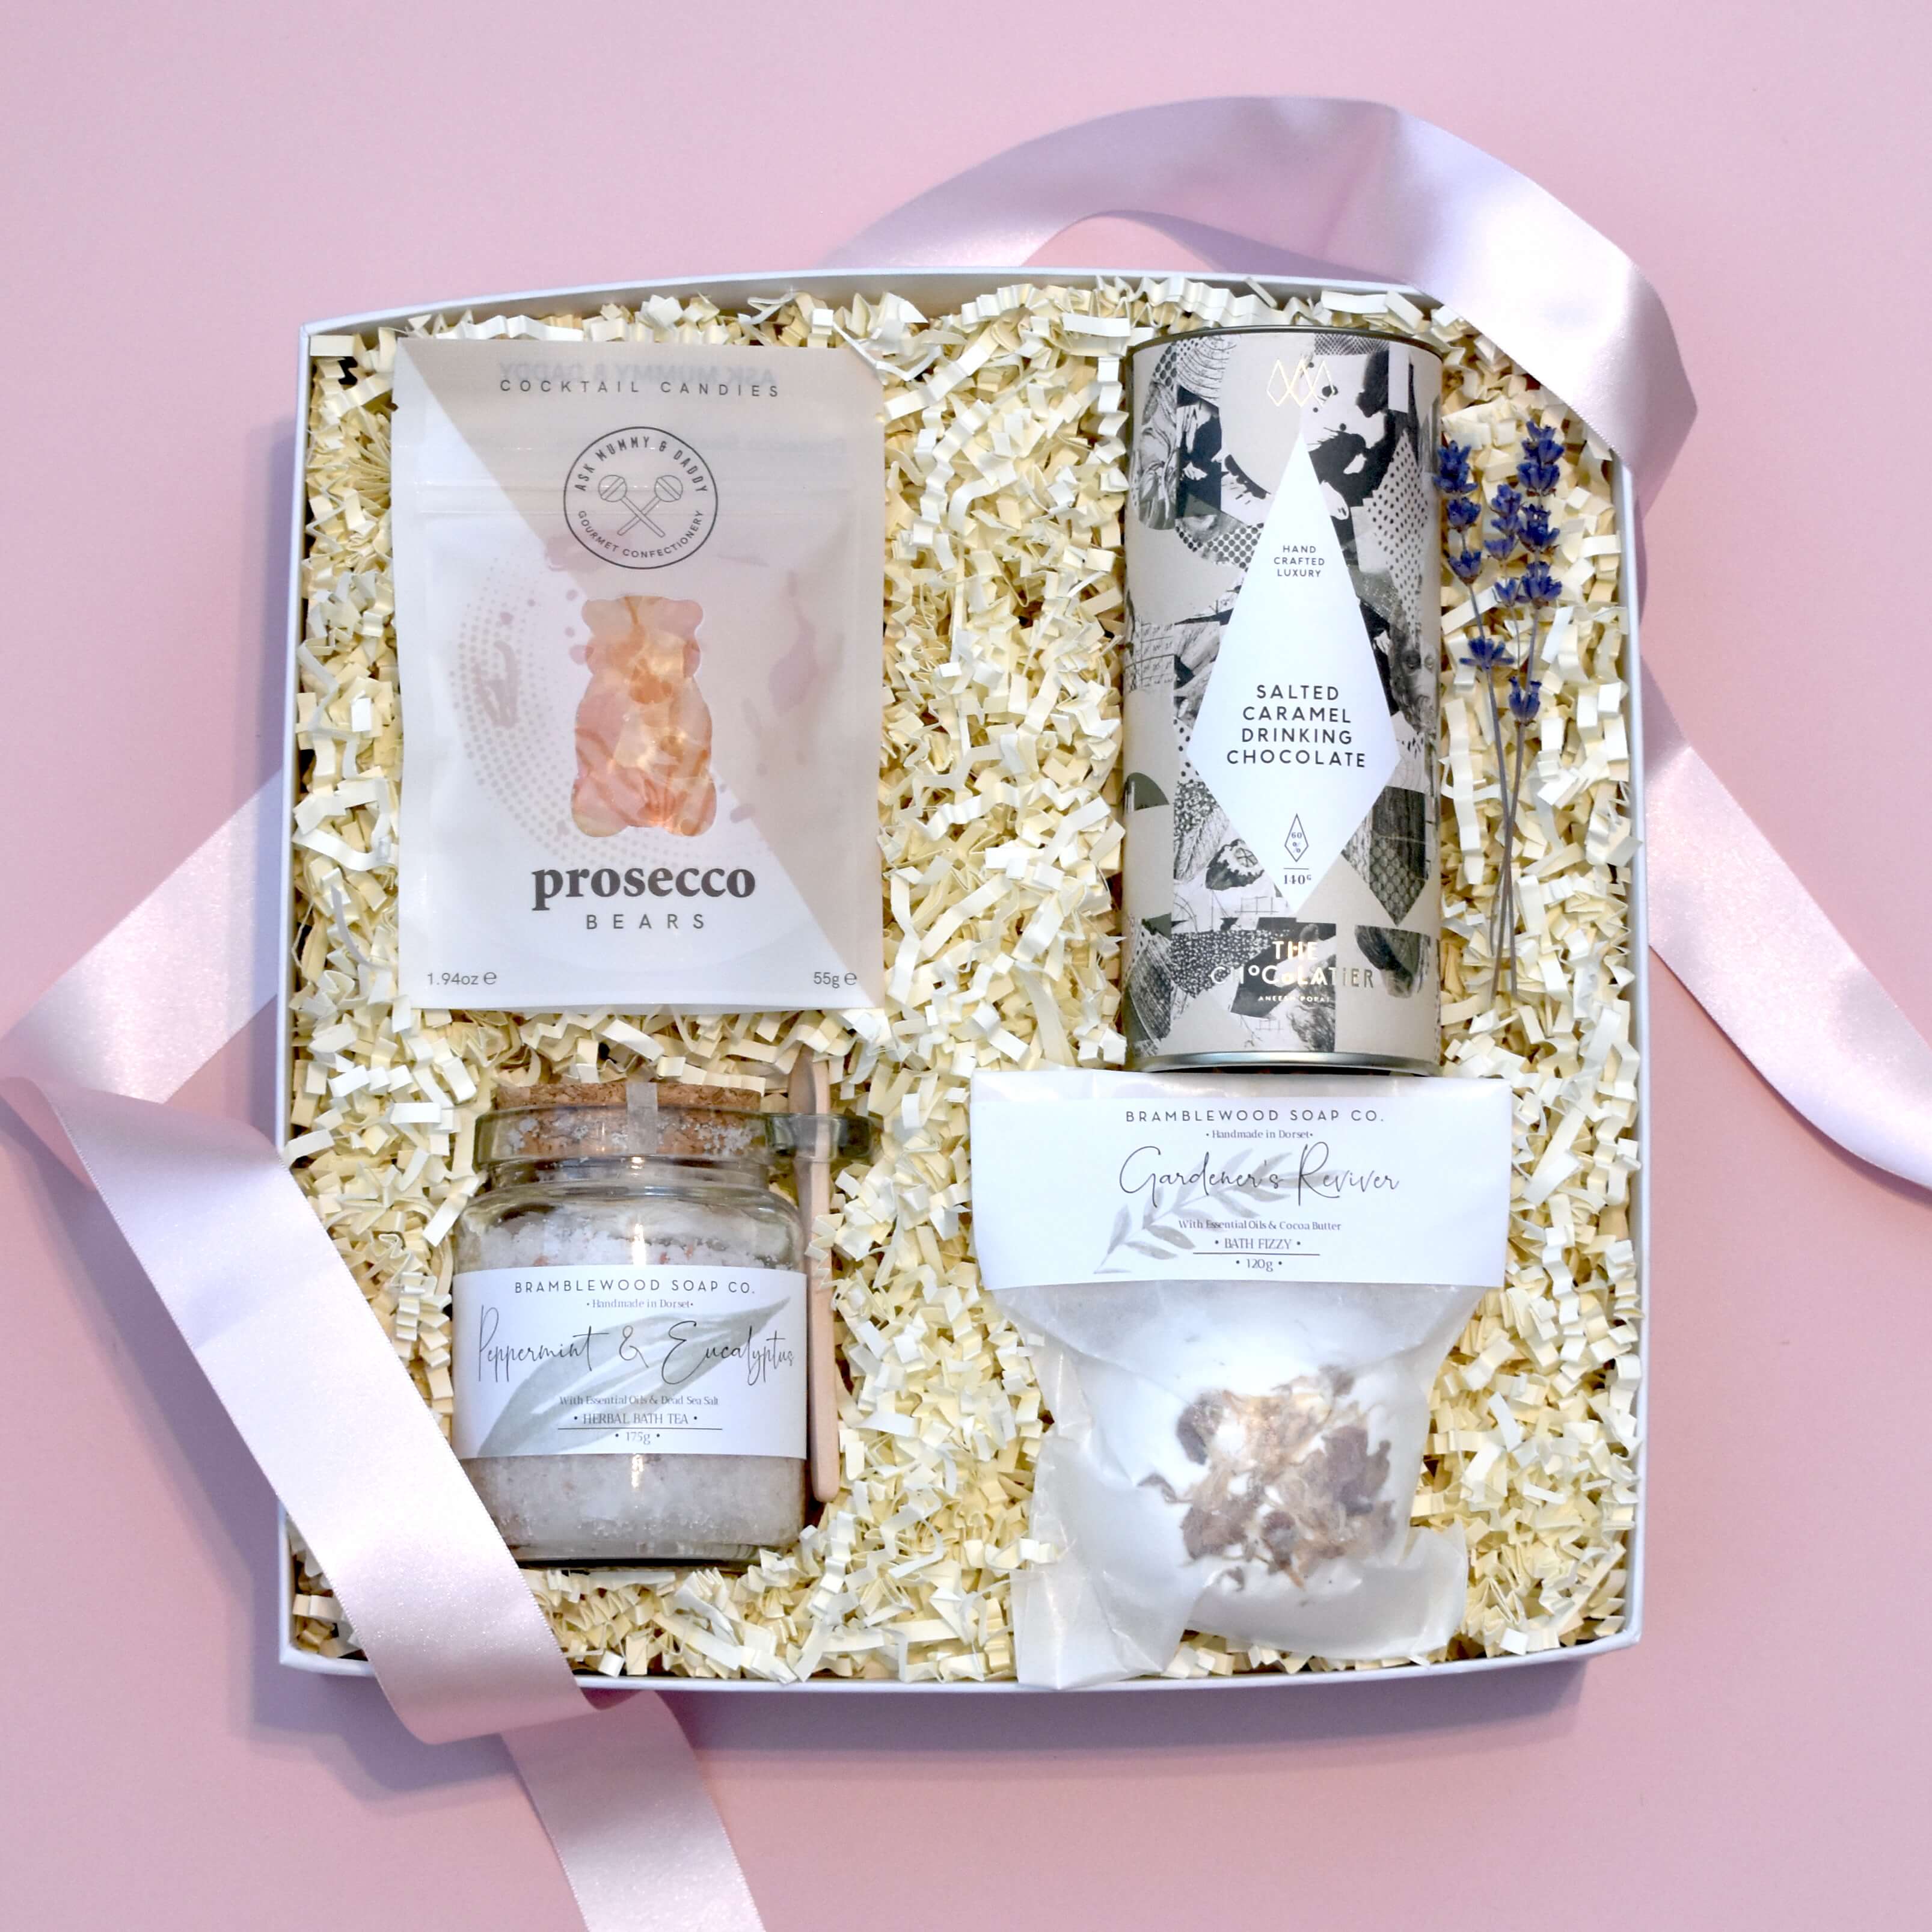 The Pink Fizz Gift Box